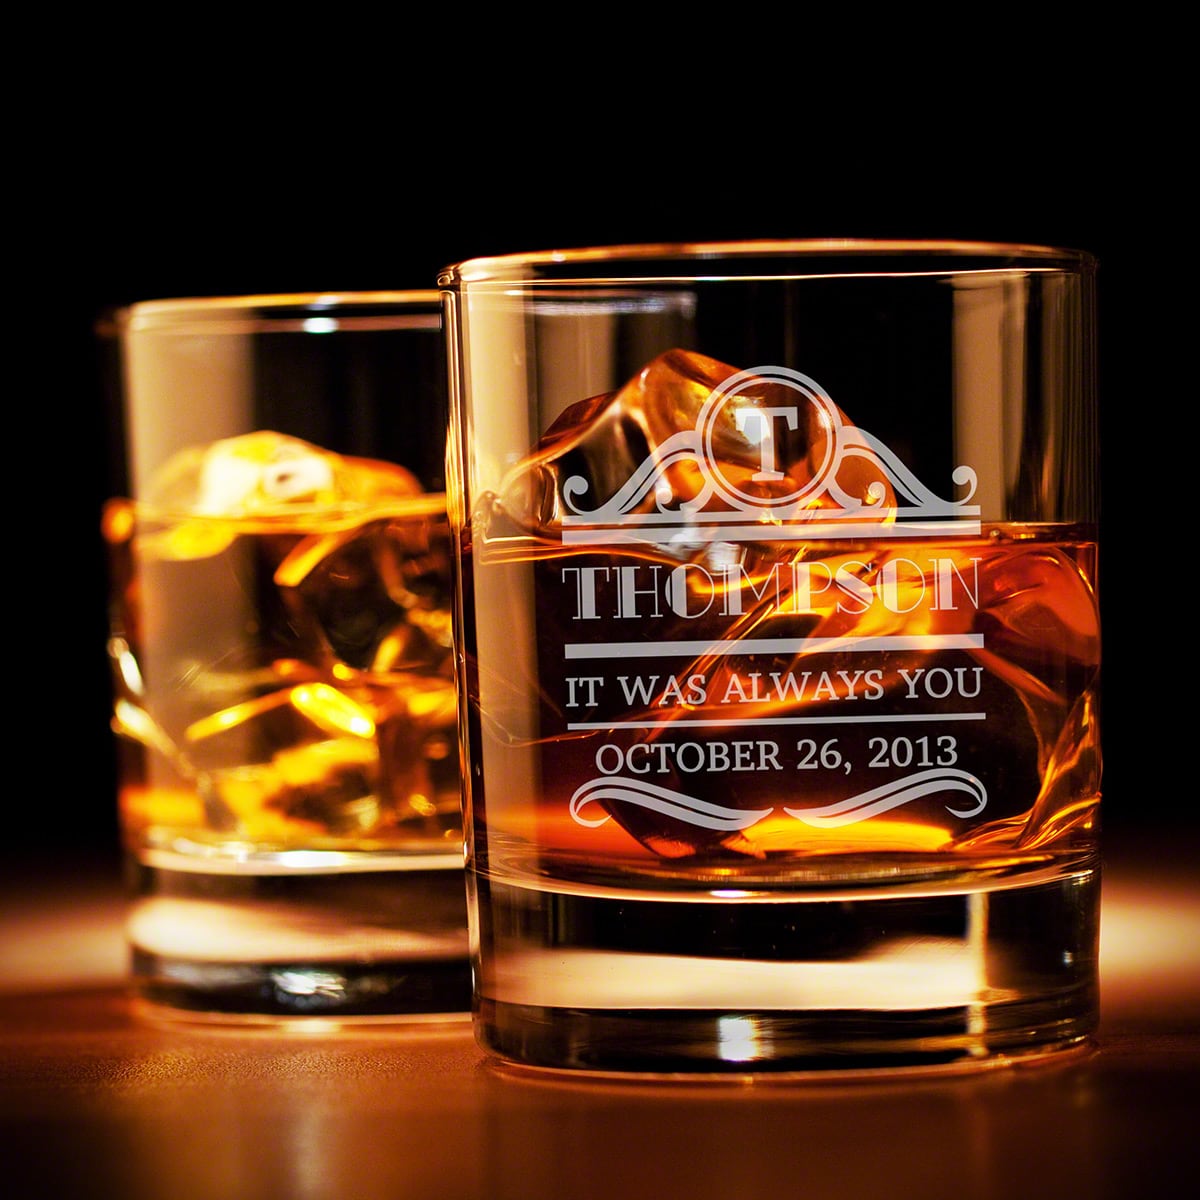 Engraved Glasses and Stones Gift Box Set for Whiskey Lovers